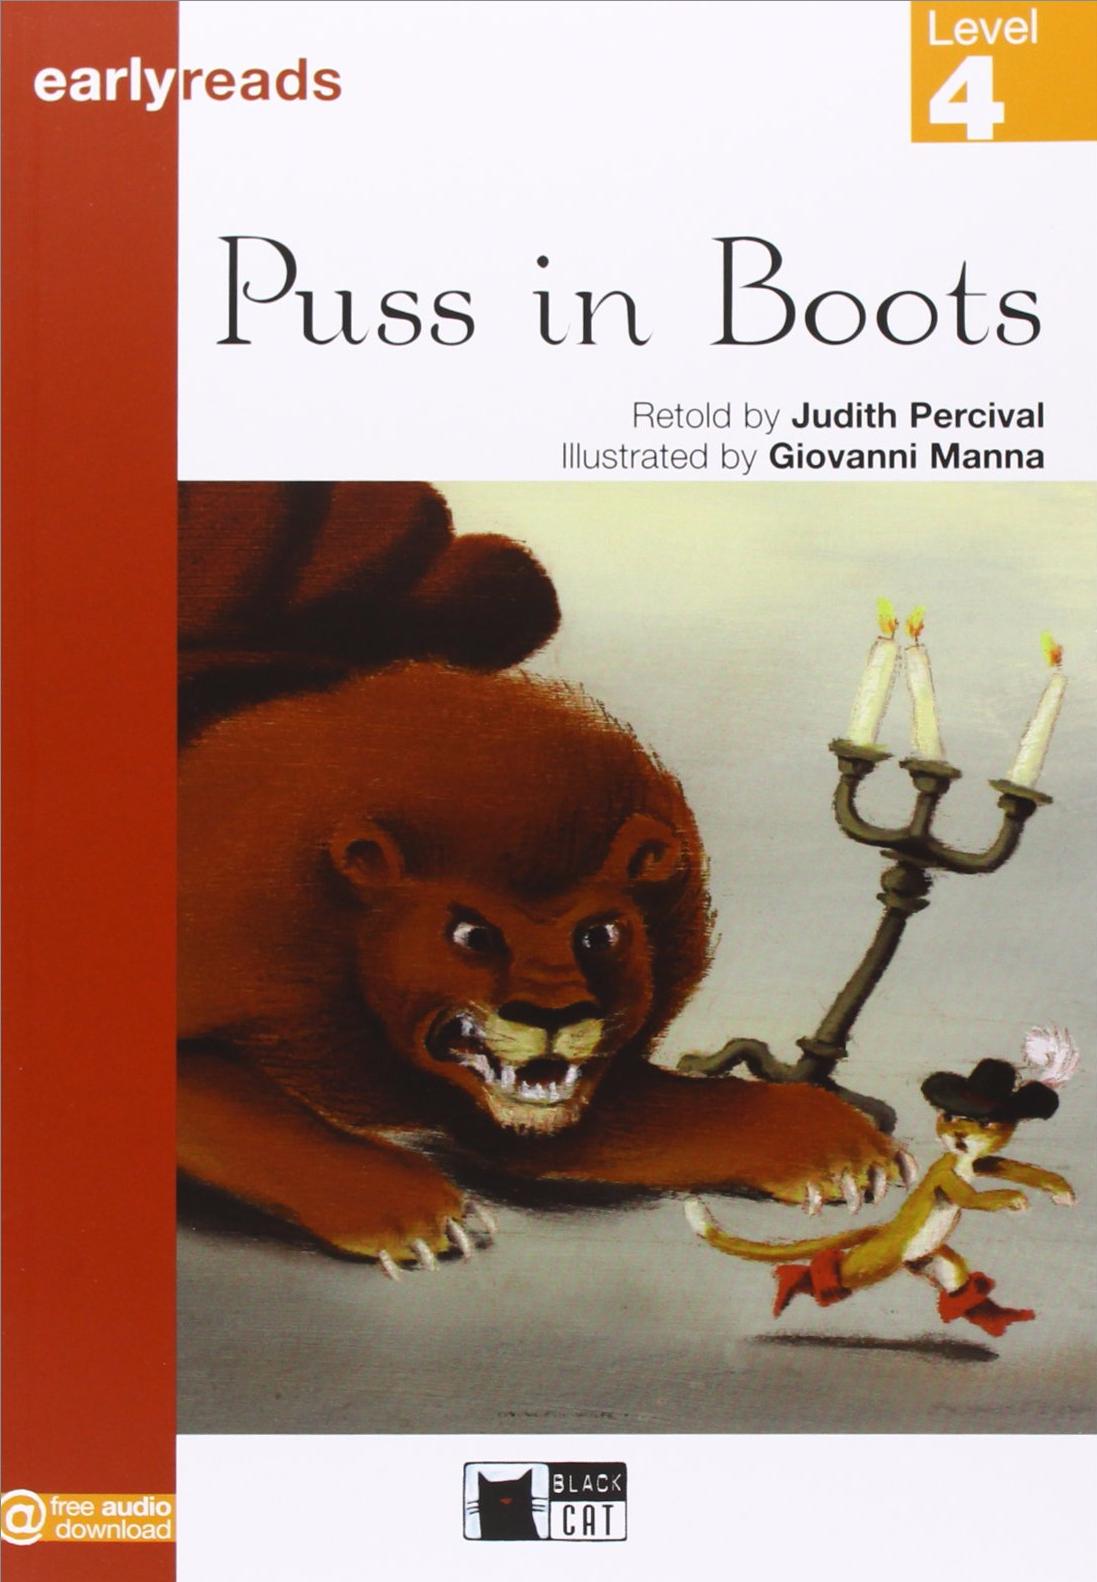 PUSS IN BOOTS (EARLYREADS LEVEL 4)  Book